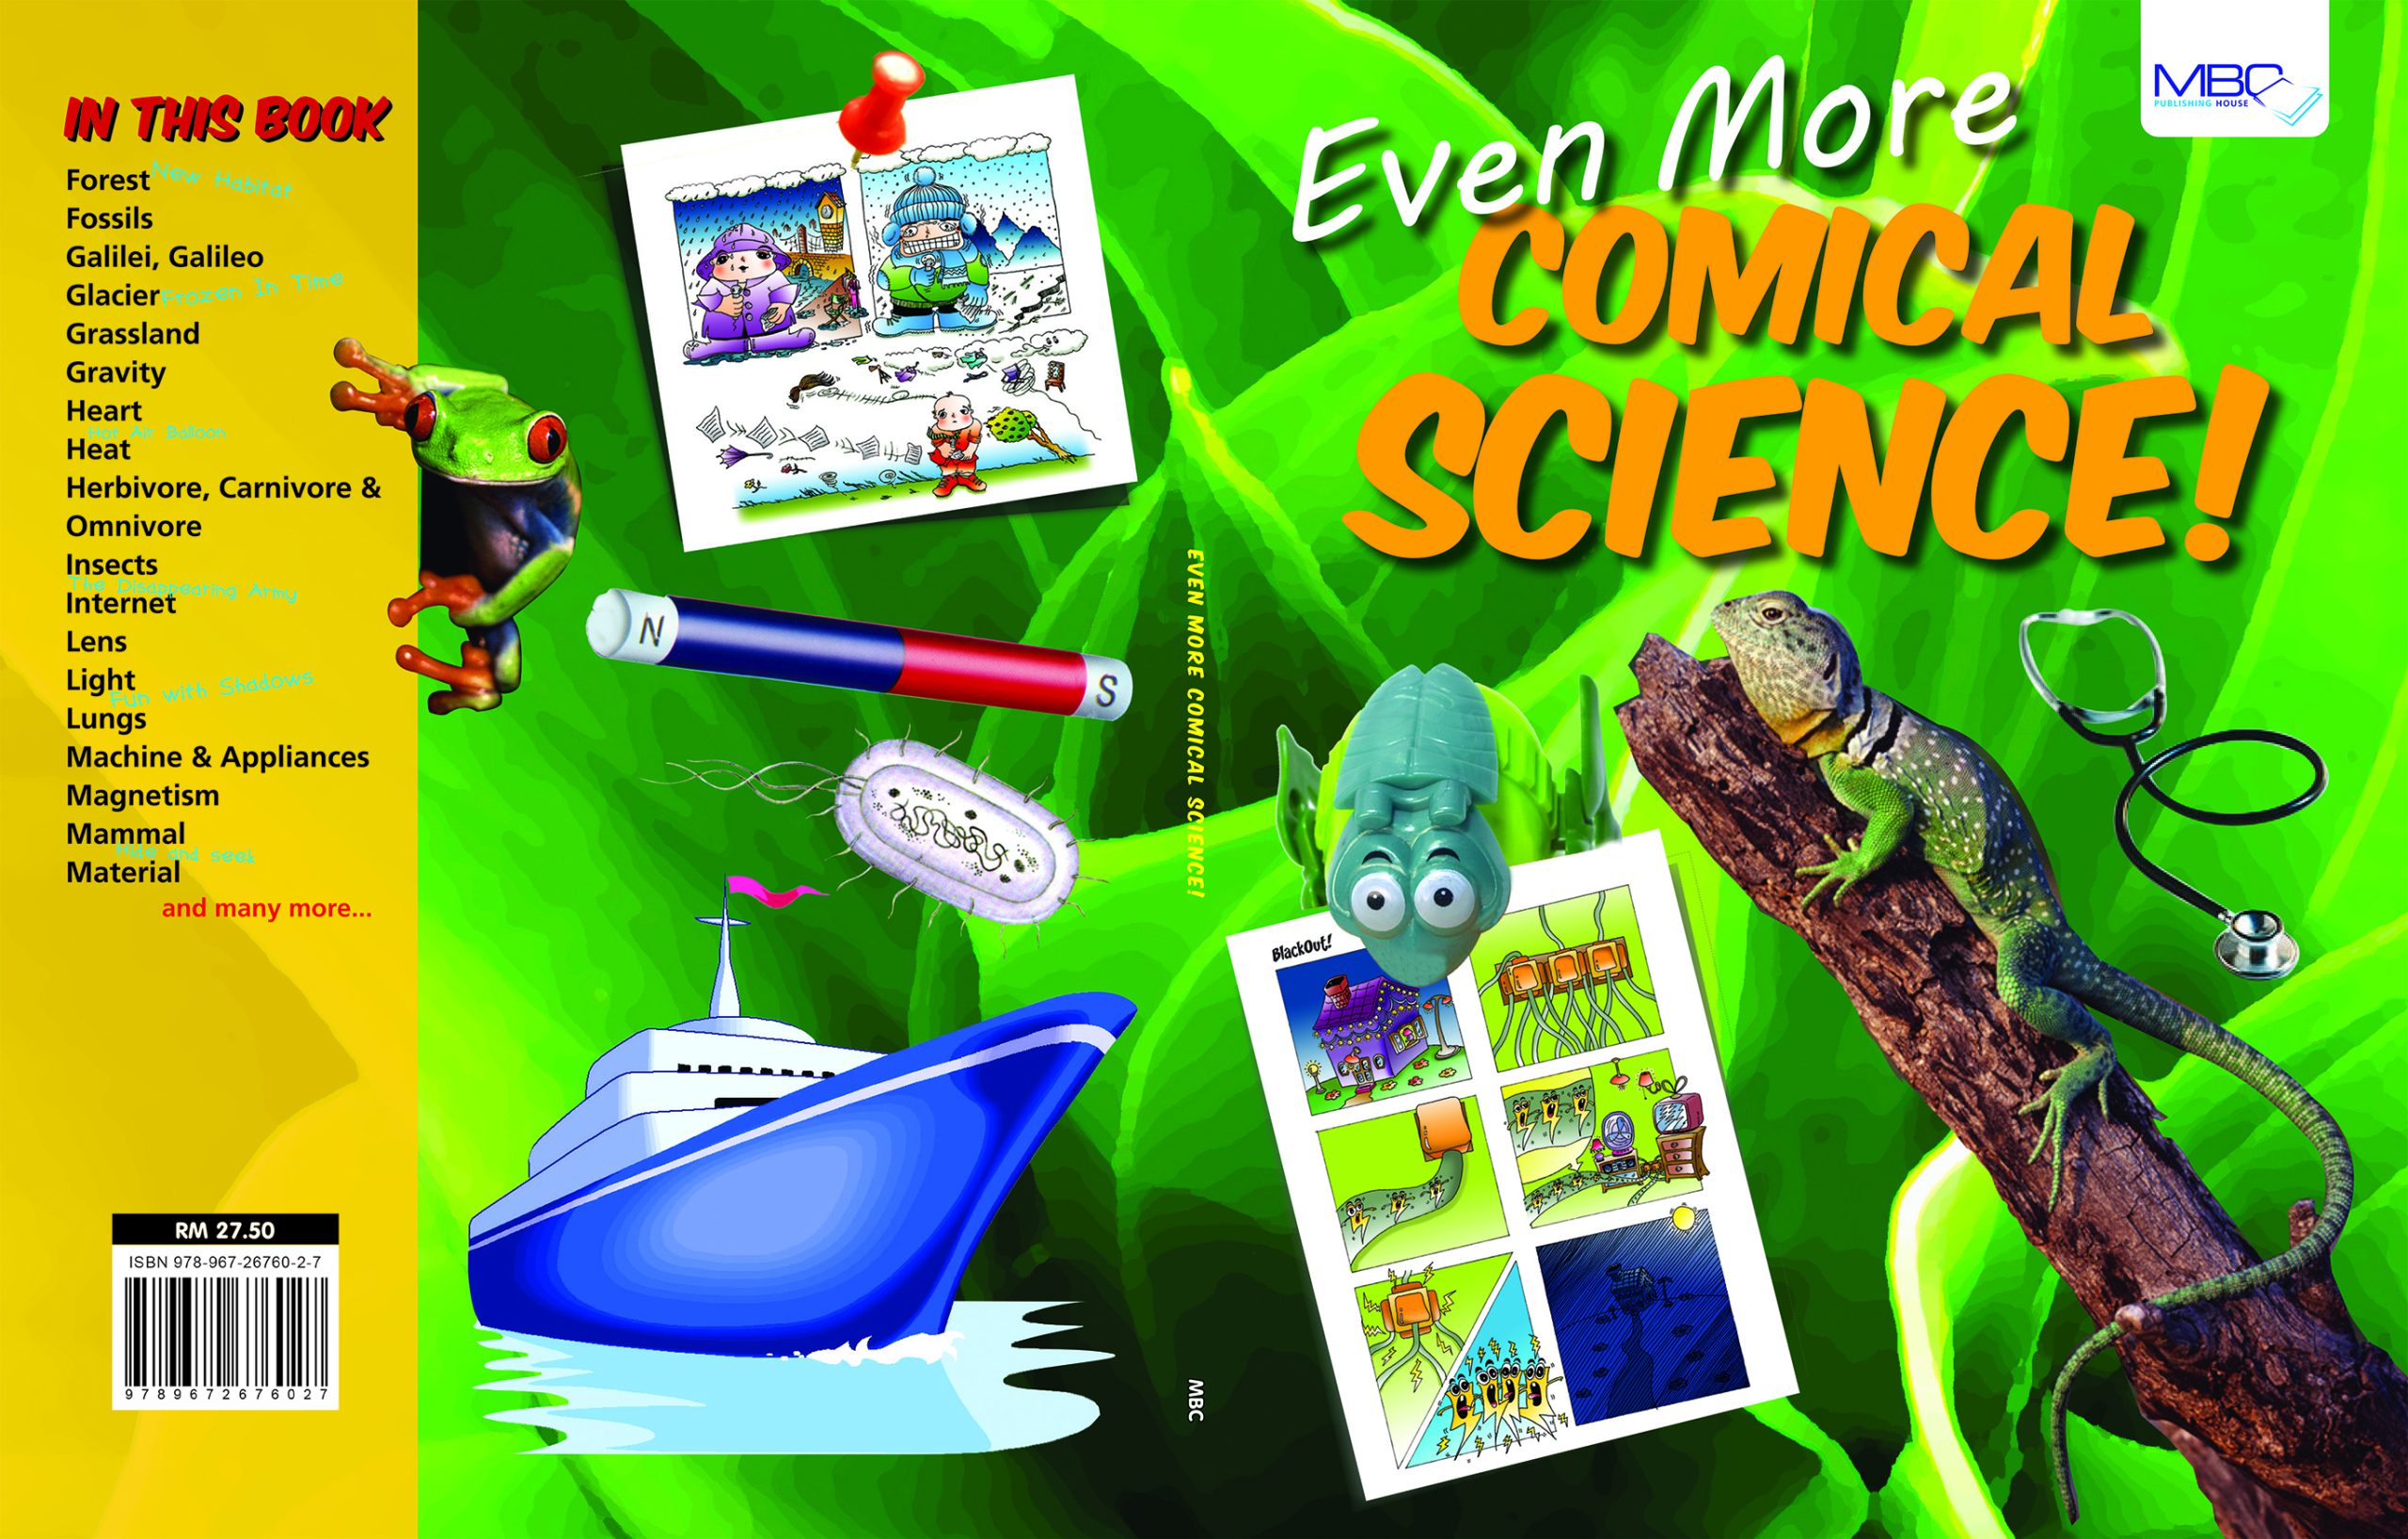 Even More Comical Science Cover Book 03 (1)